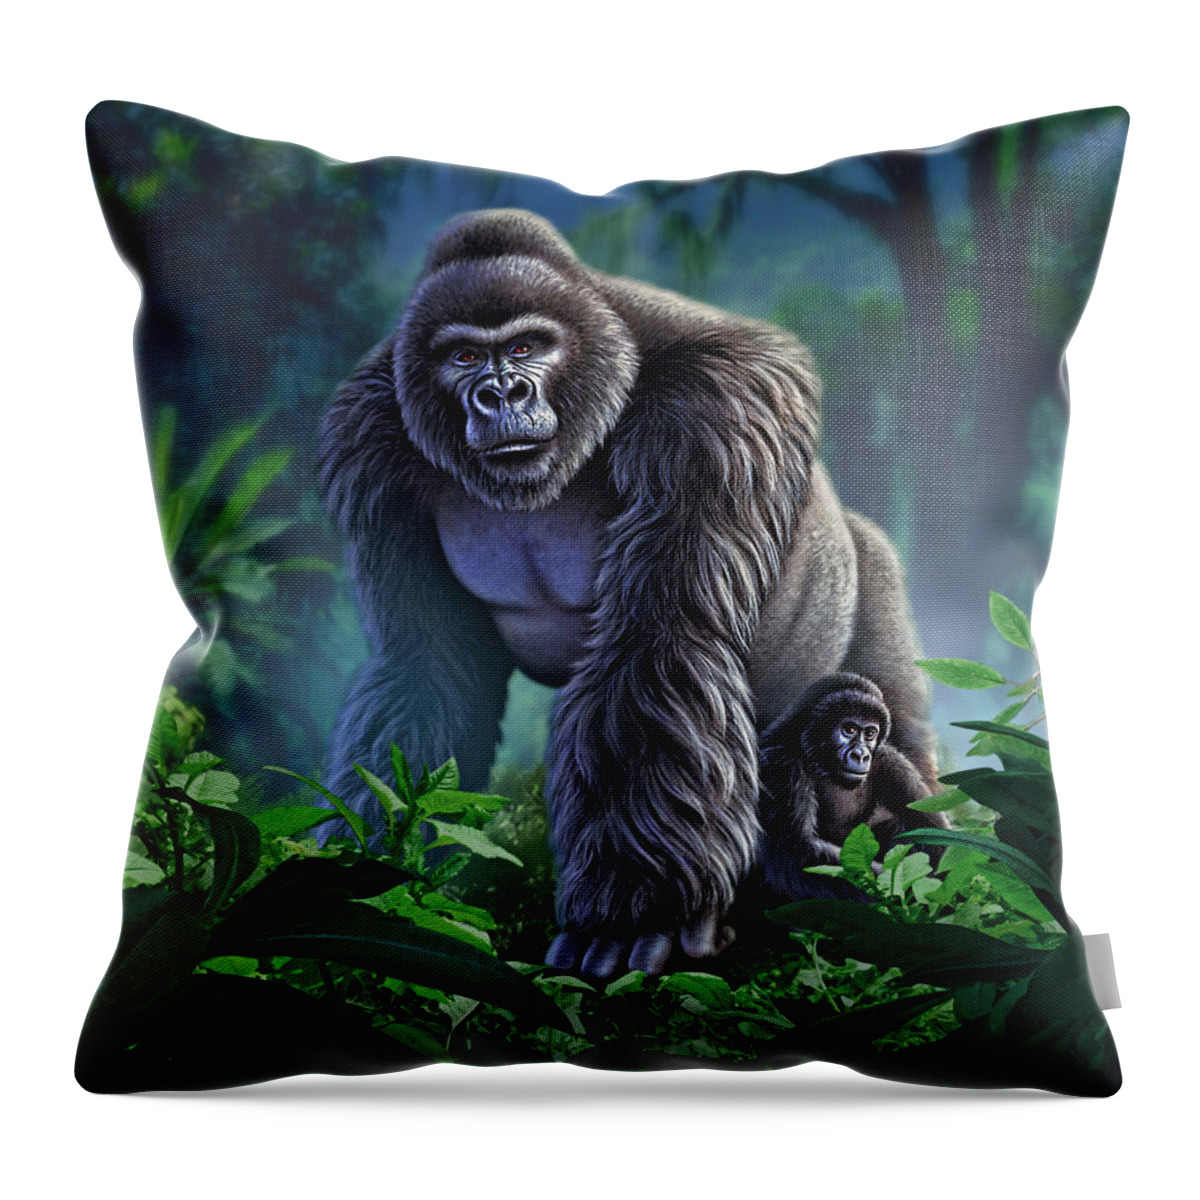 Gorilla Throw Pillow featuring the painting Guardian by Jerry LoFaro